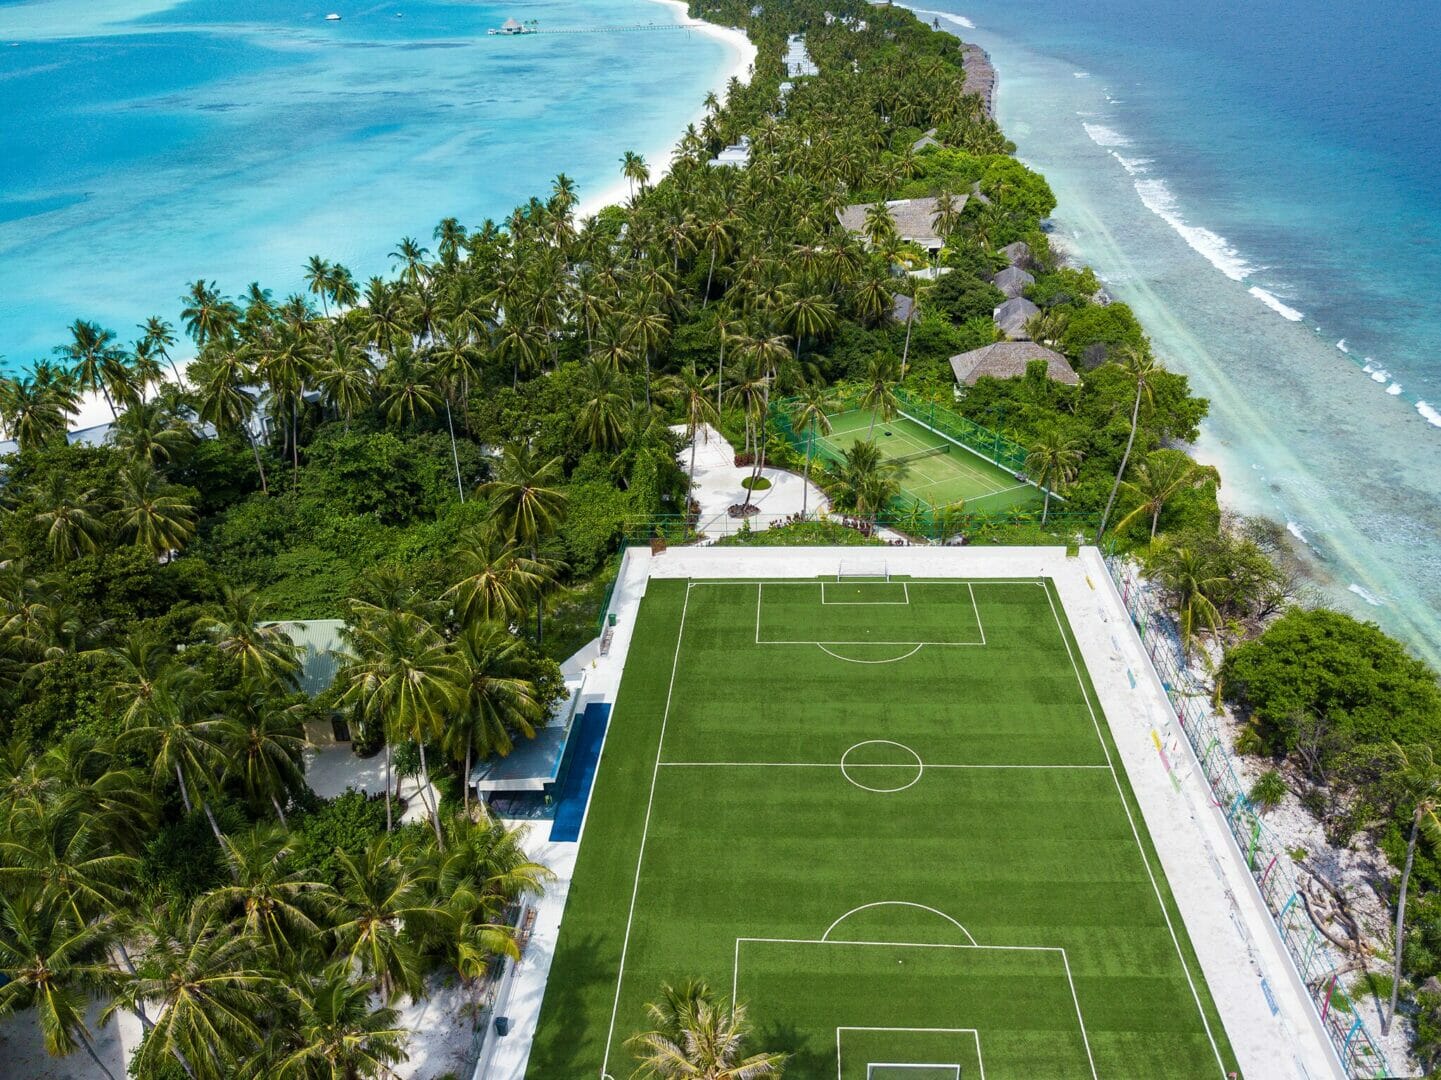 Pitch perfect – Kandima Maldives scores with soccer fans thanks to their full-sized pitch.